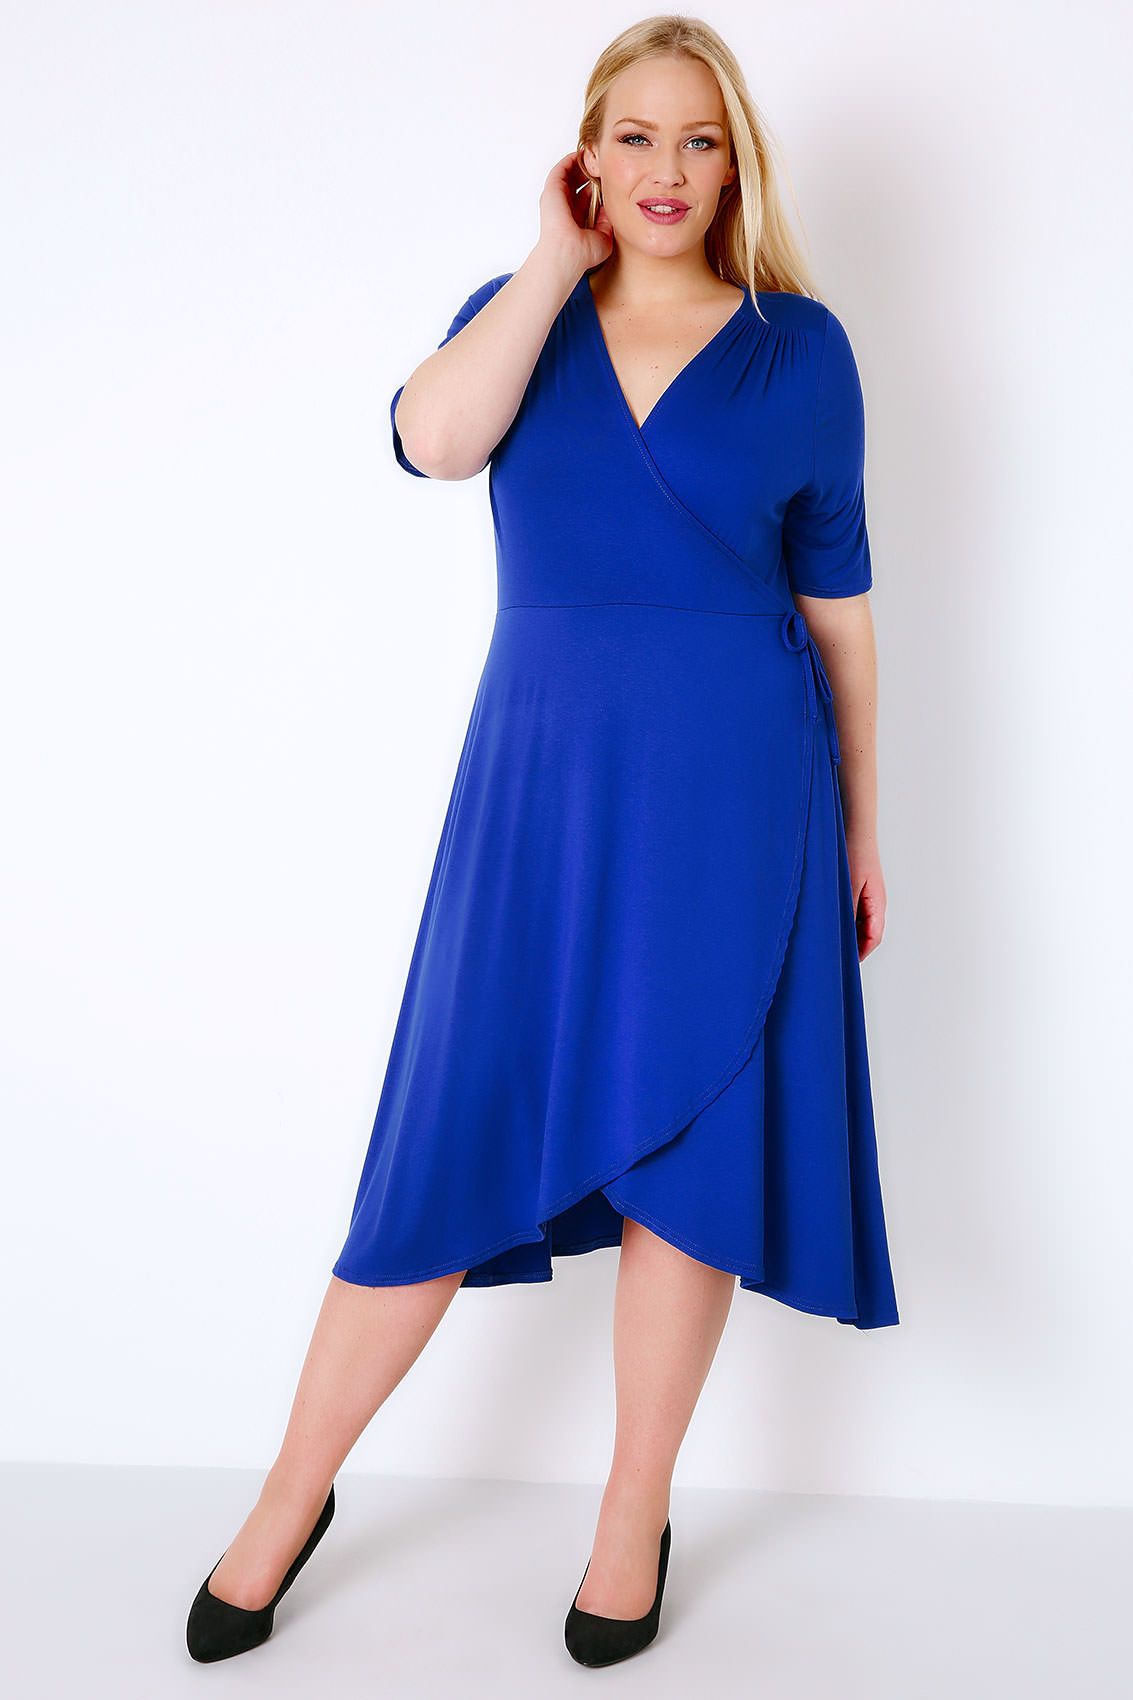 Royal Blue Wrap Dress With Short Sleeves, Plus size 16 to 32